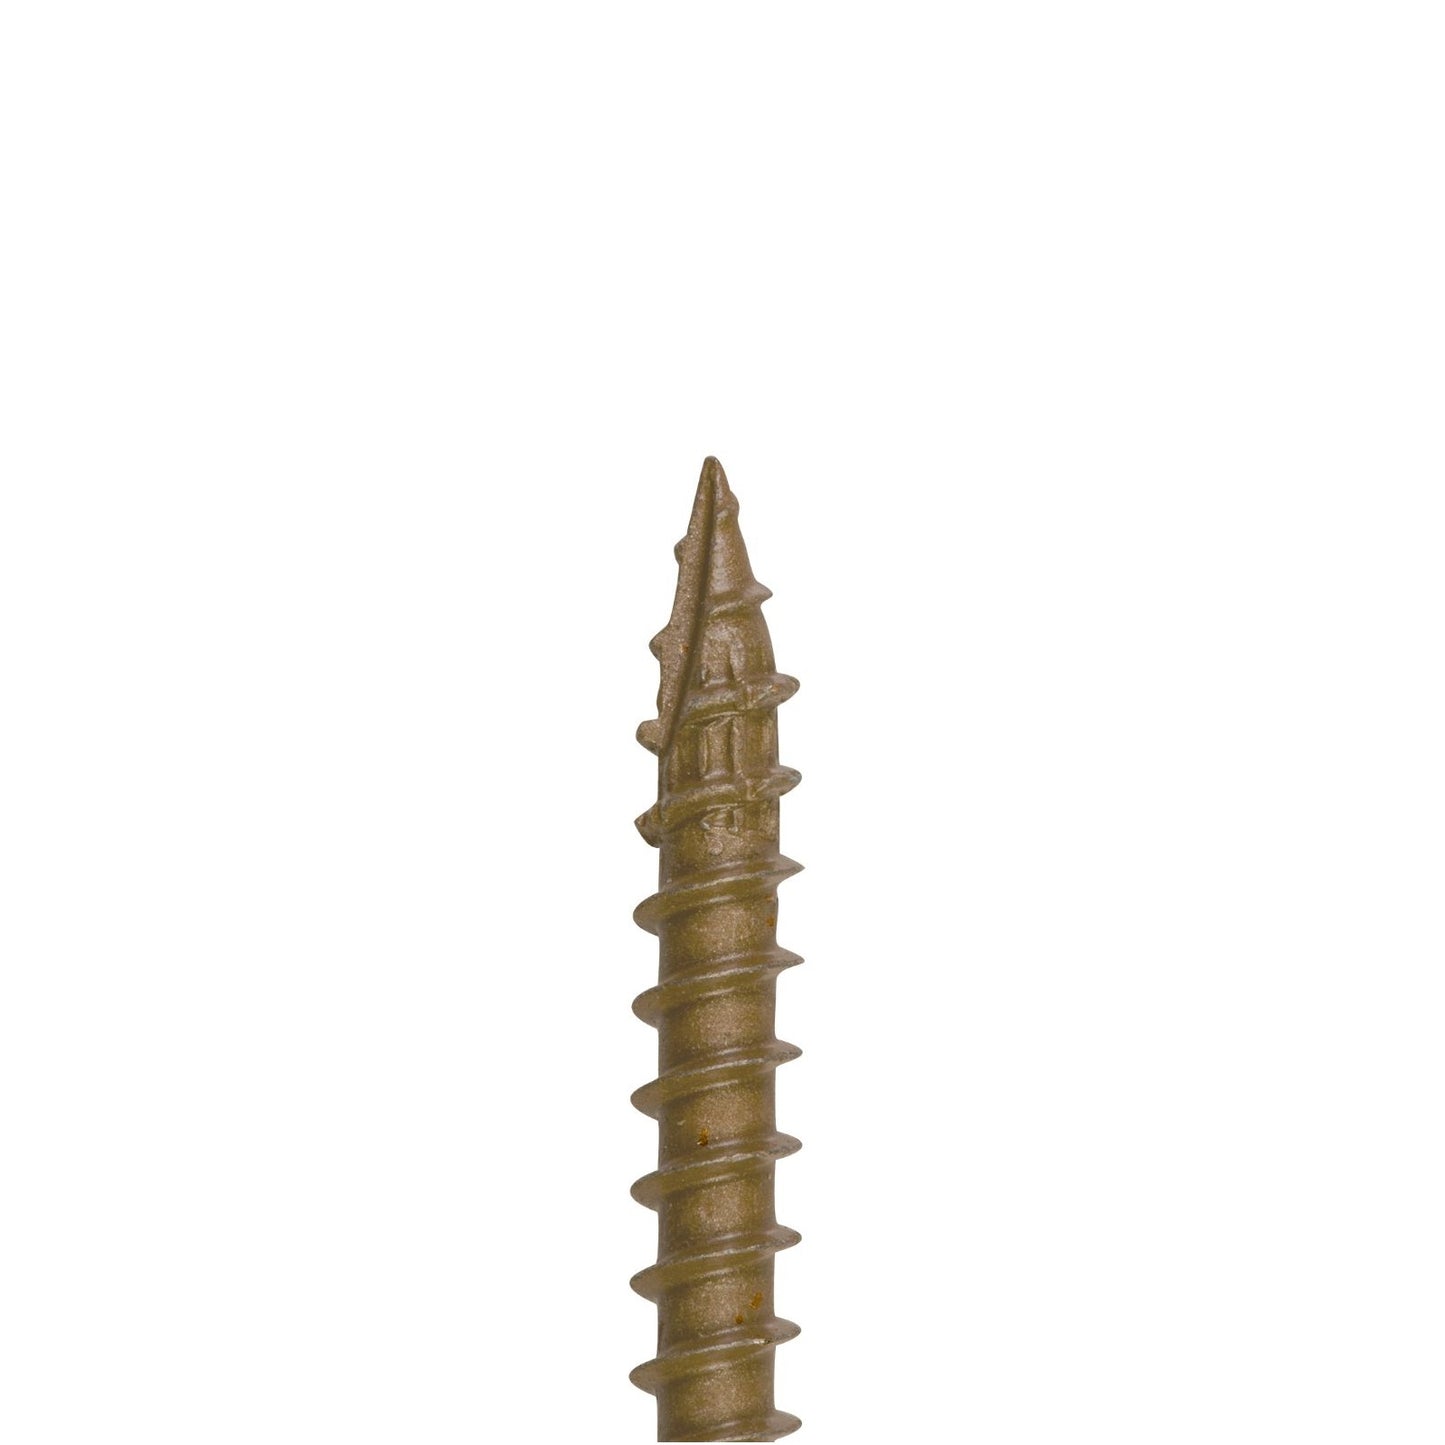 160 inch x 212 inch StrongTie SDWS Framing Screws Pkg 250 image 1 of 3 image 2 of 3 image 3 of 3